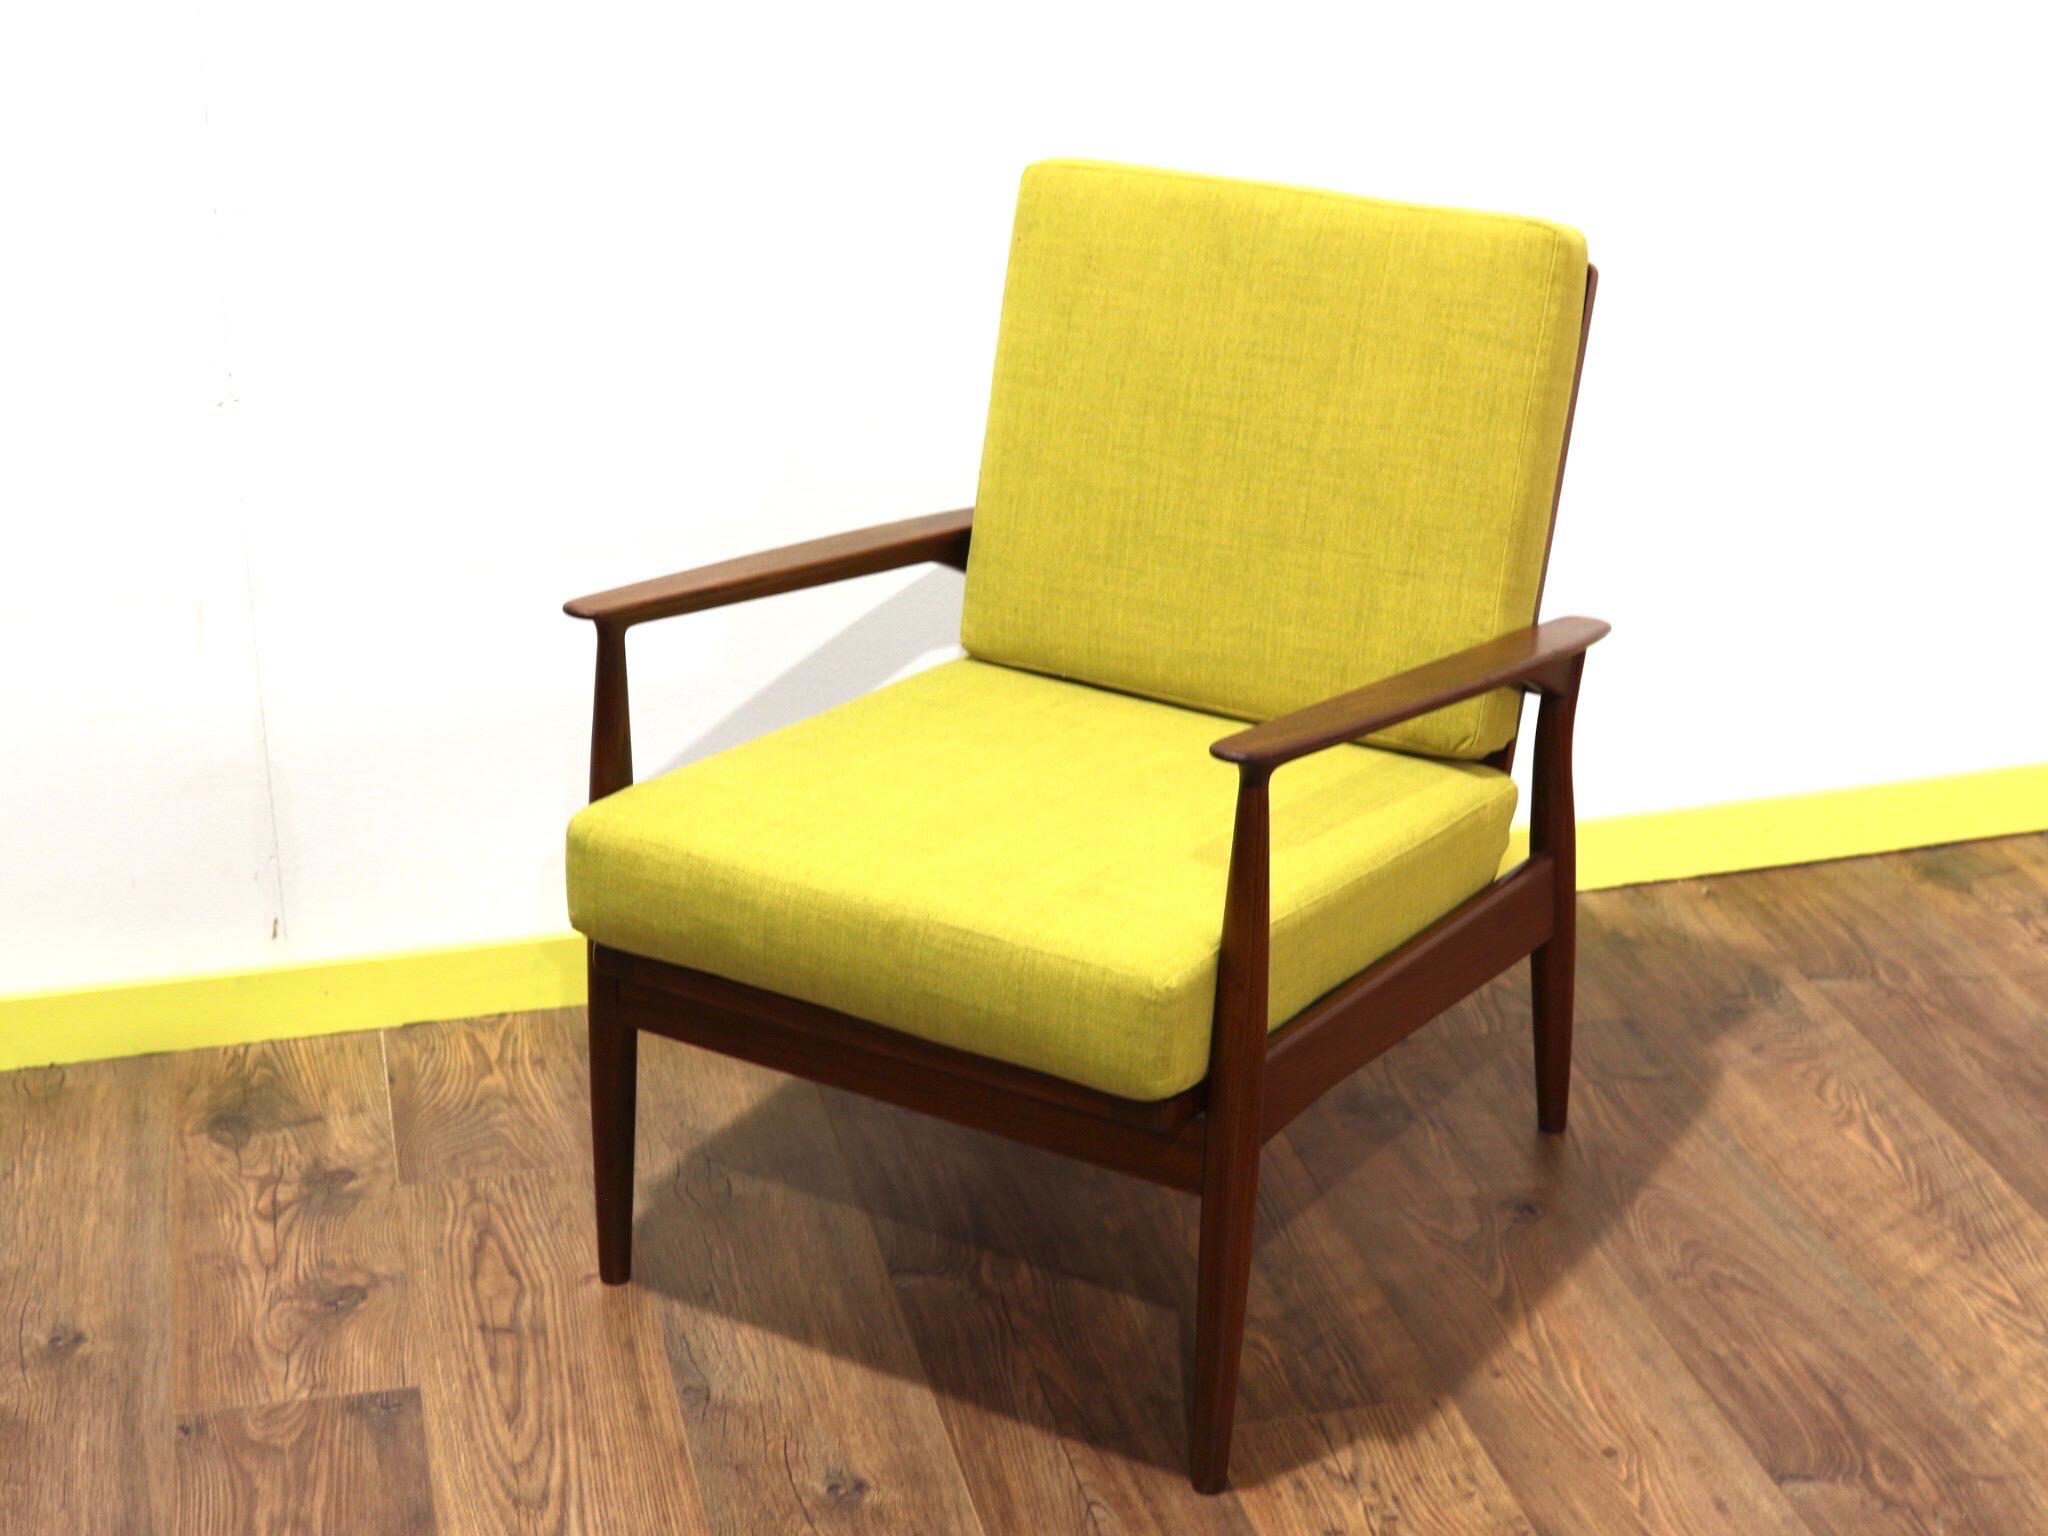 A beautiful lounge chair made by British make George Stone. A stunning piece of furniture with gorgeous lines and vibrant yellow upholstery this is a stunning chair.